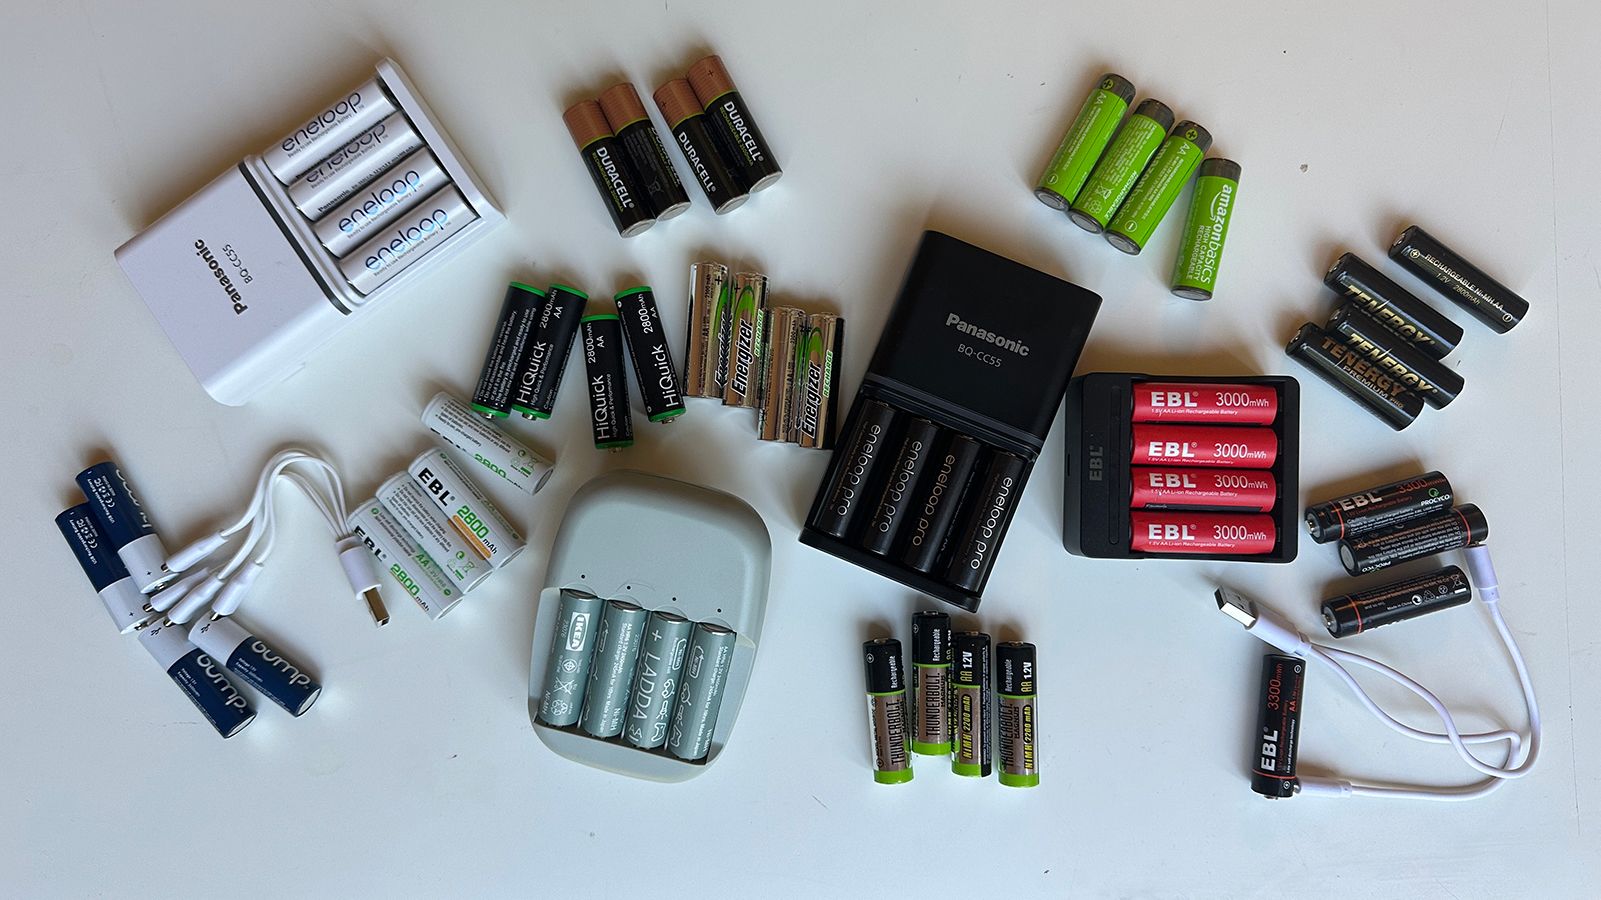 8 Tips for Safely Charging & Storing Your Rechargeable Batteries